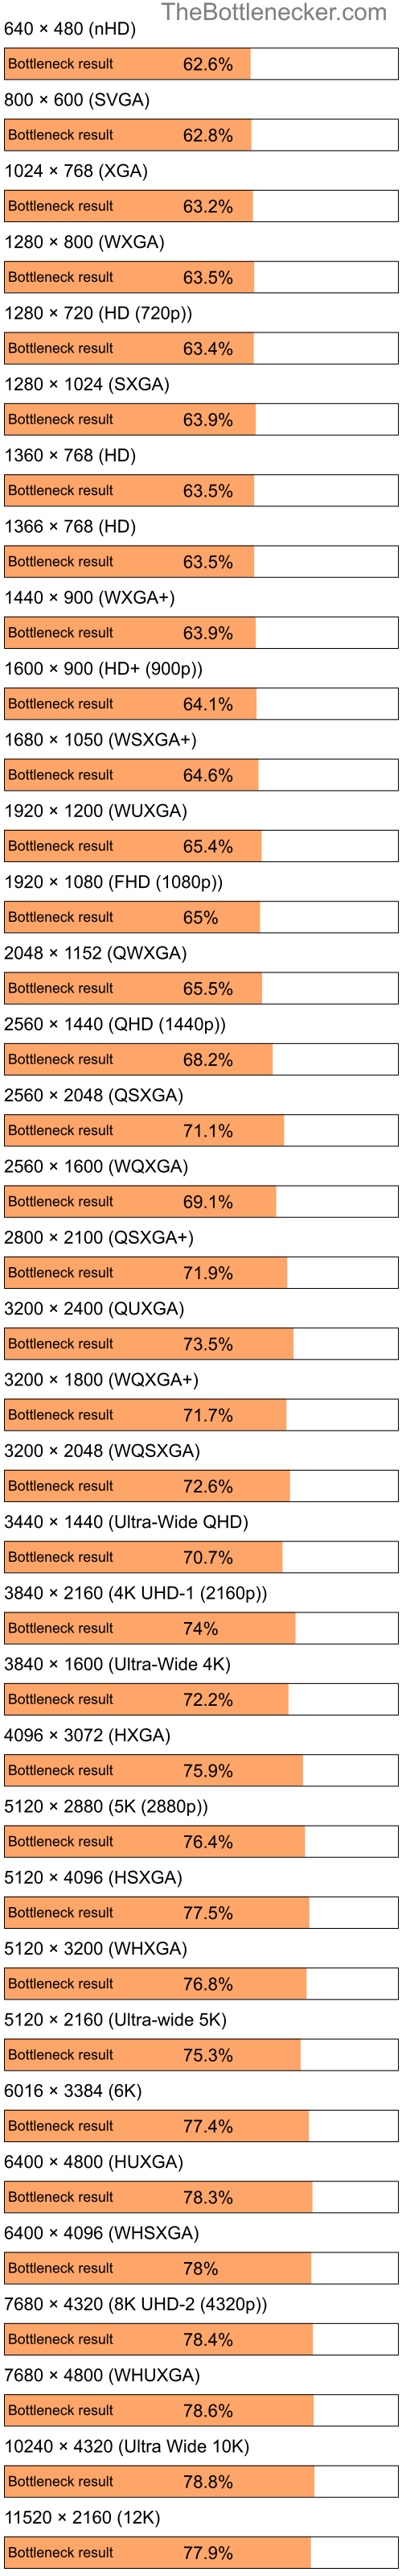 Bottleneck results by resolution for Intel Pentium 4 and AMD Mobility Radeon HD 3470 in General Tasks